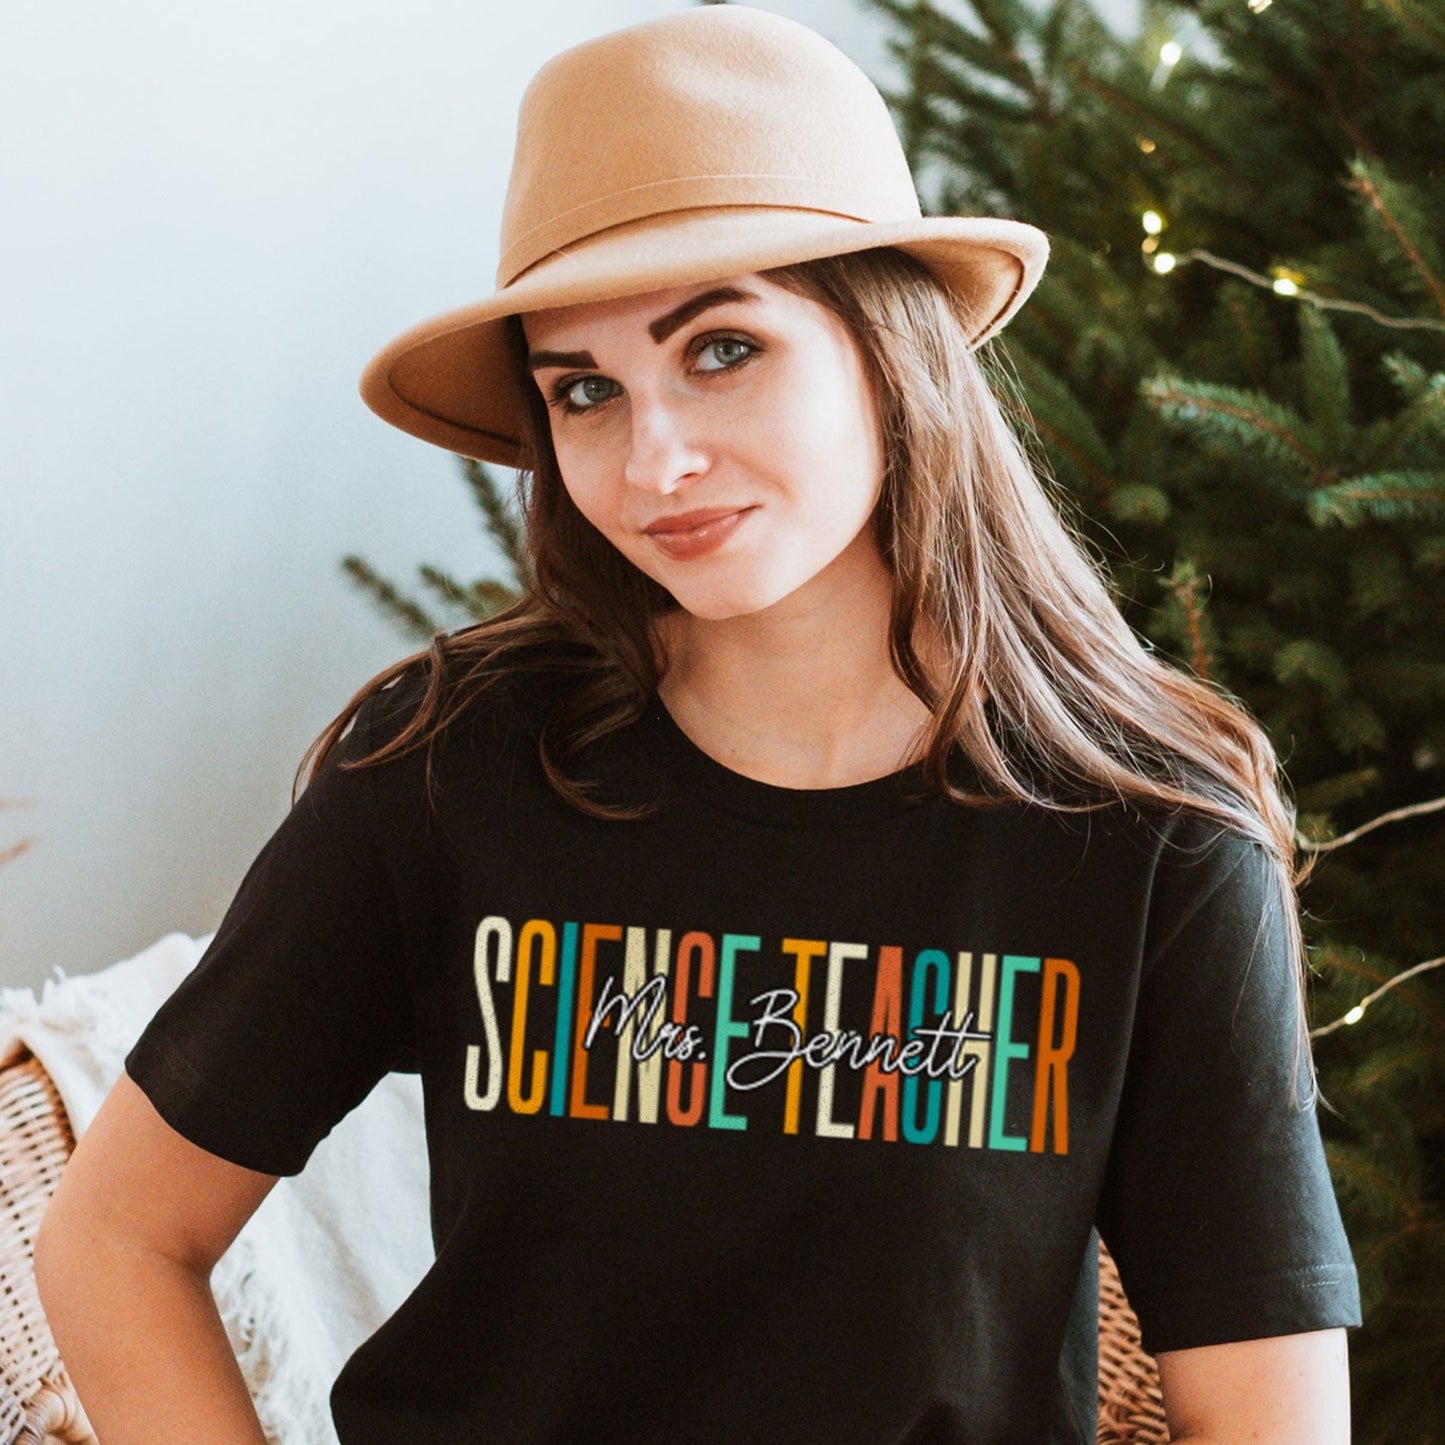 Custom Science Teacher Shirt Personalized Rainbow T-Shirt, STEM Teacher Shirt, Science Sweatshirt With Name, Future Science Educator Gifts